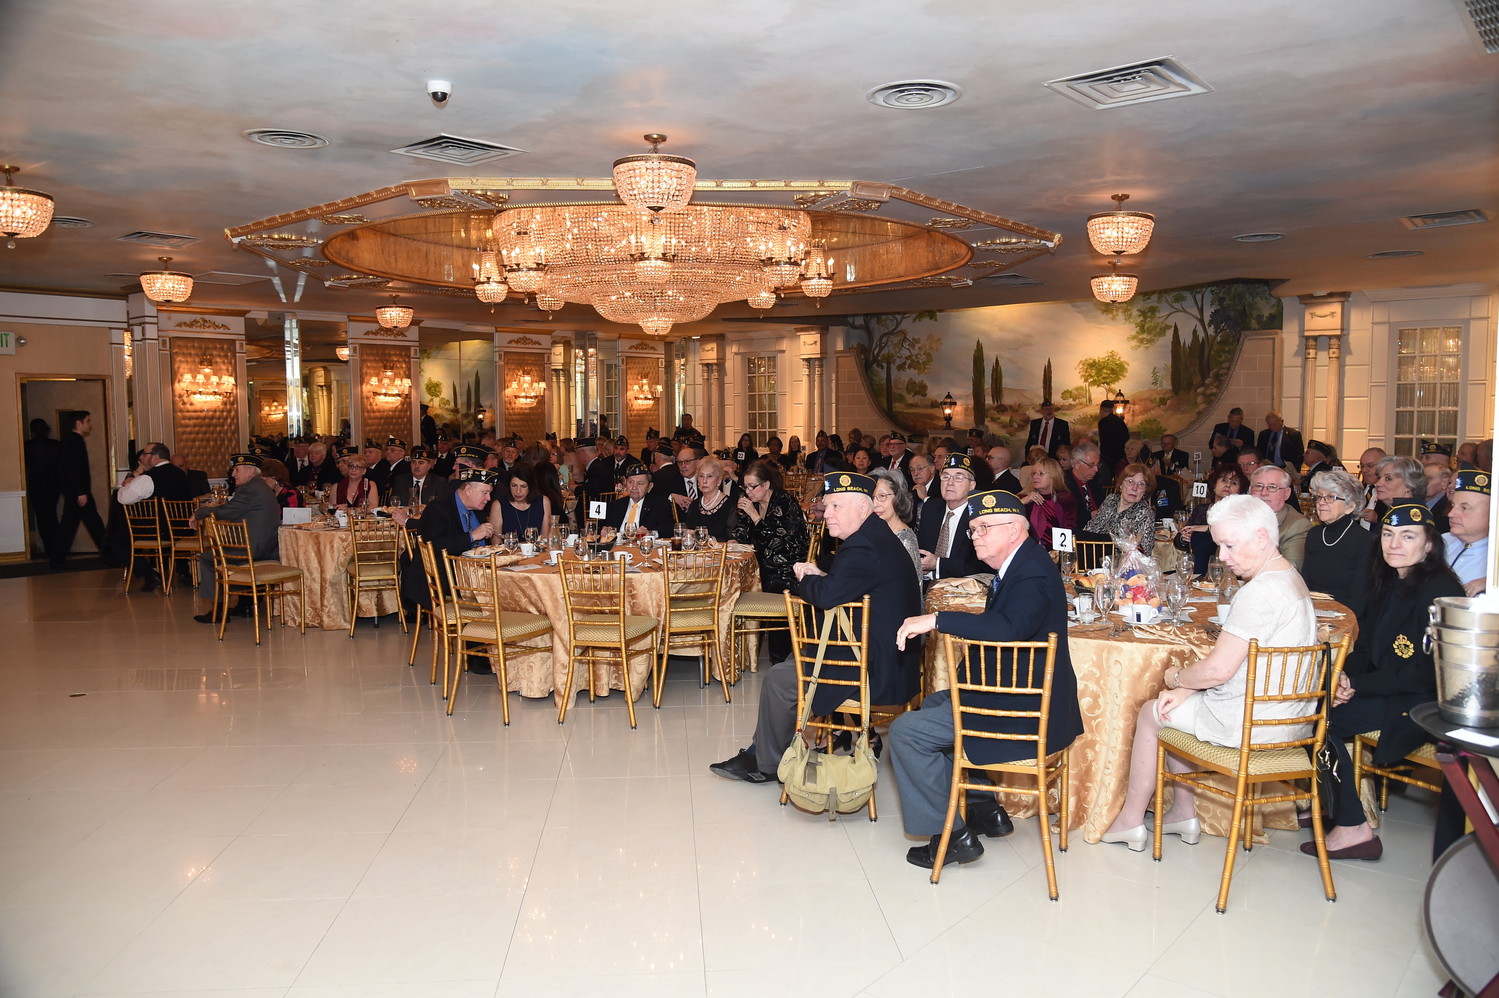 More than 100 people attended the annual event.